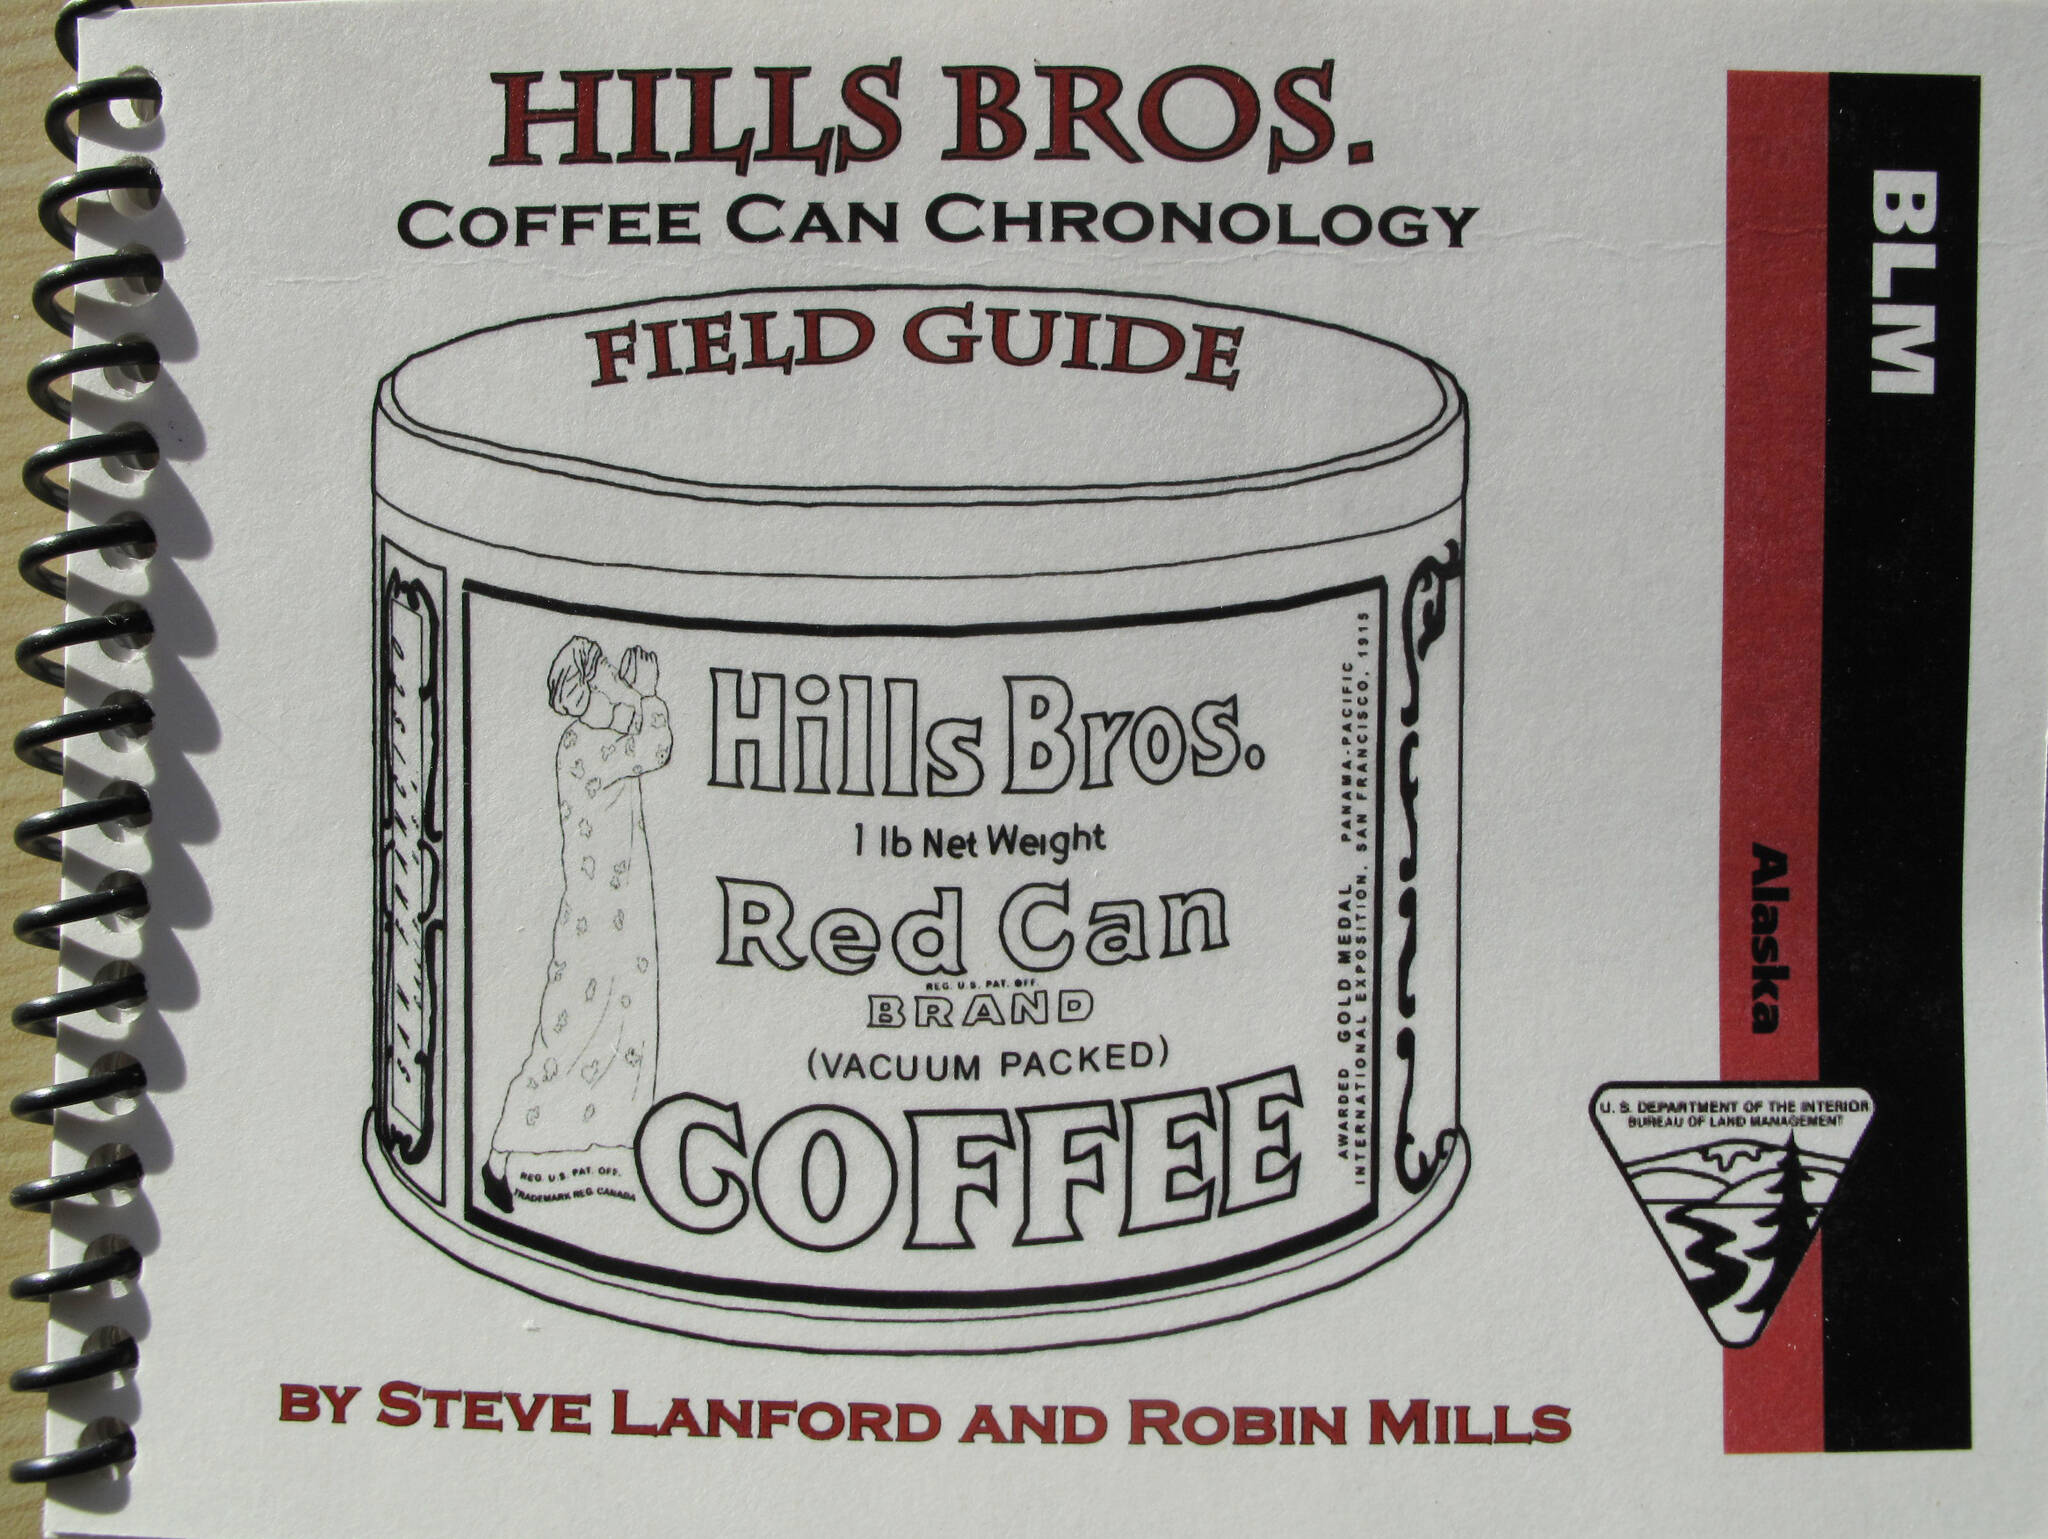 The coffee can field guide produced by Steve Lanford and Robin Mills. (Courtesy Photo / Ned Rozell)